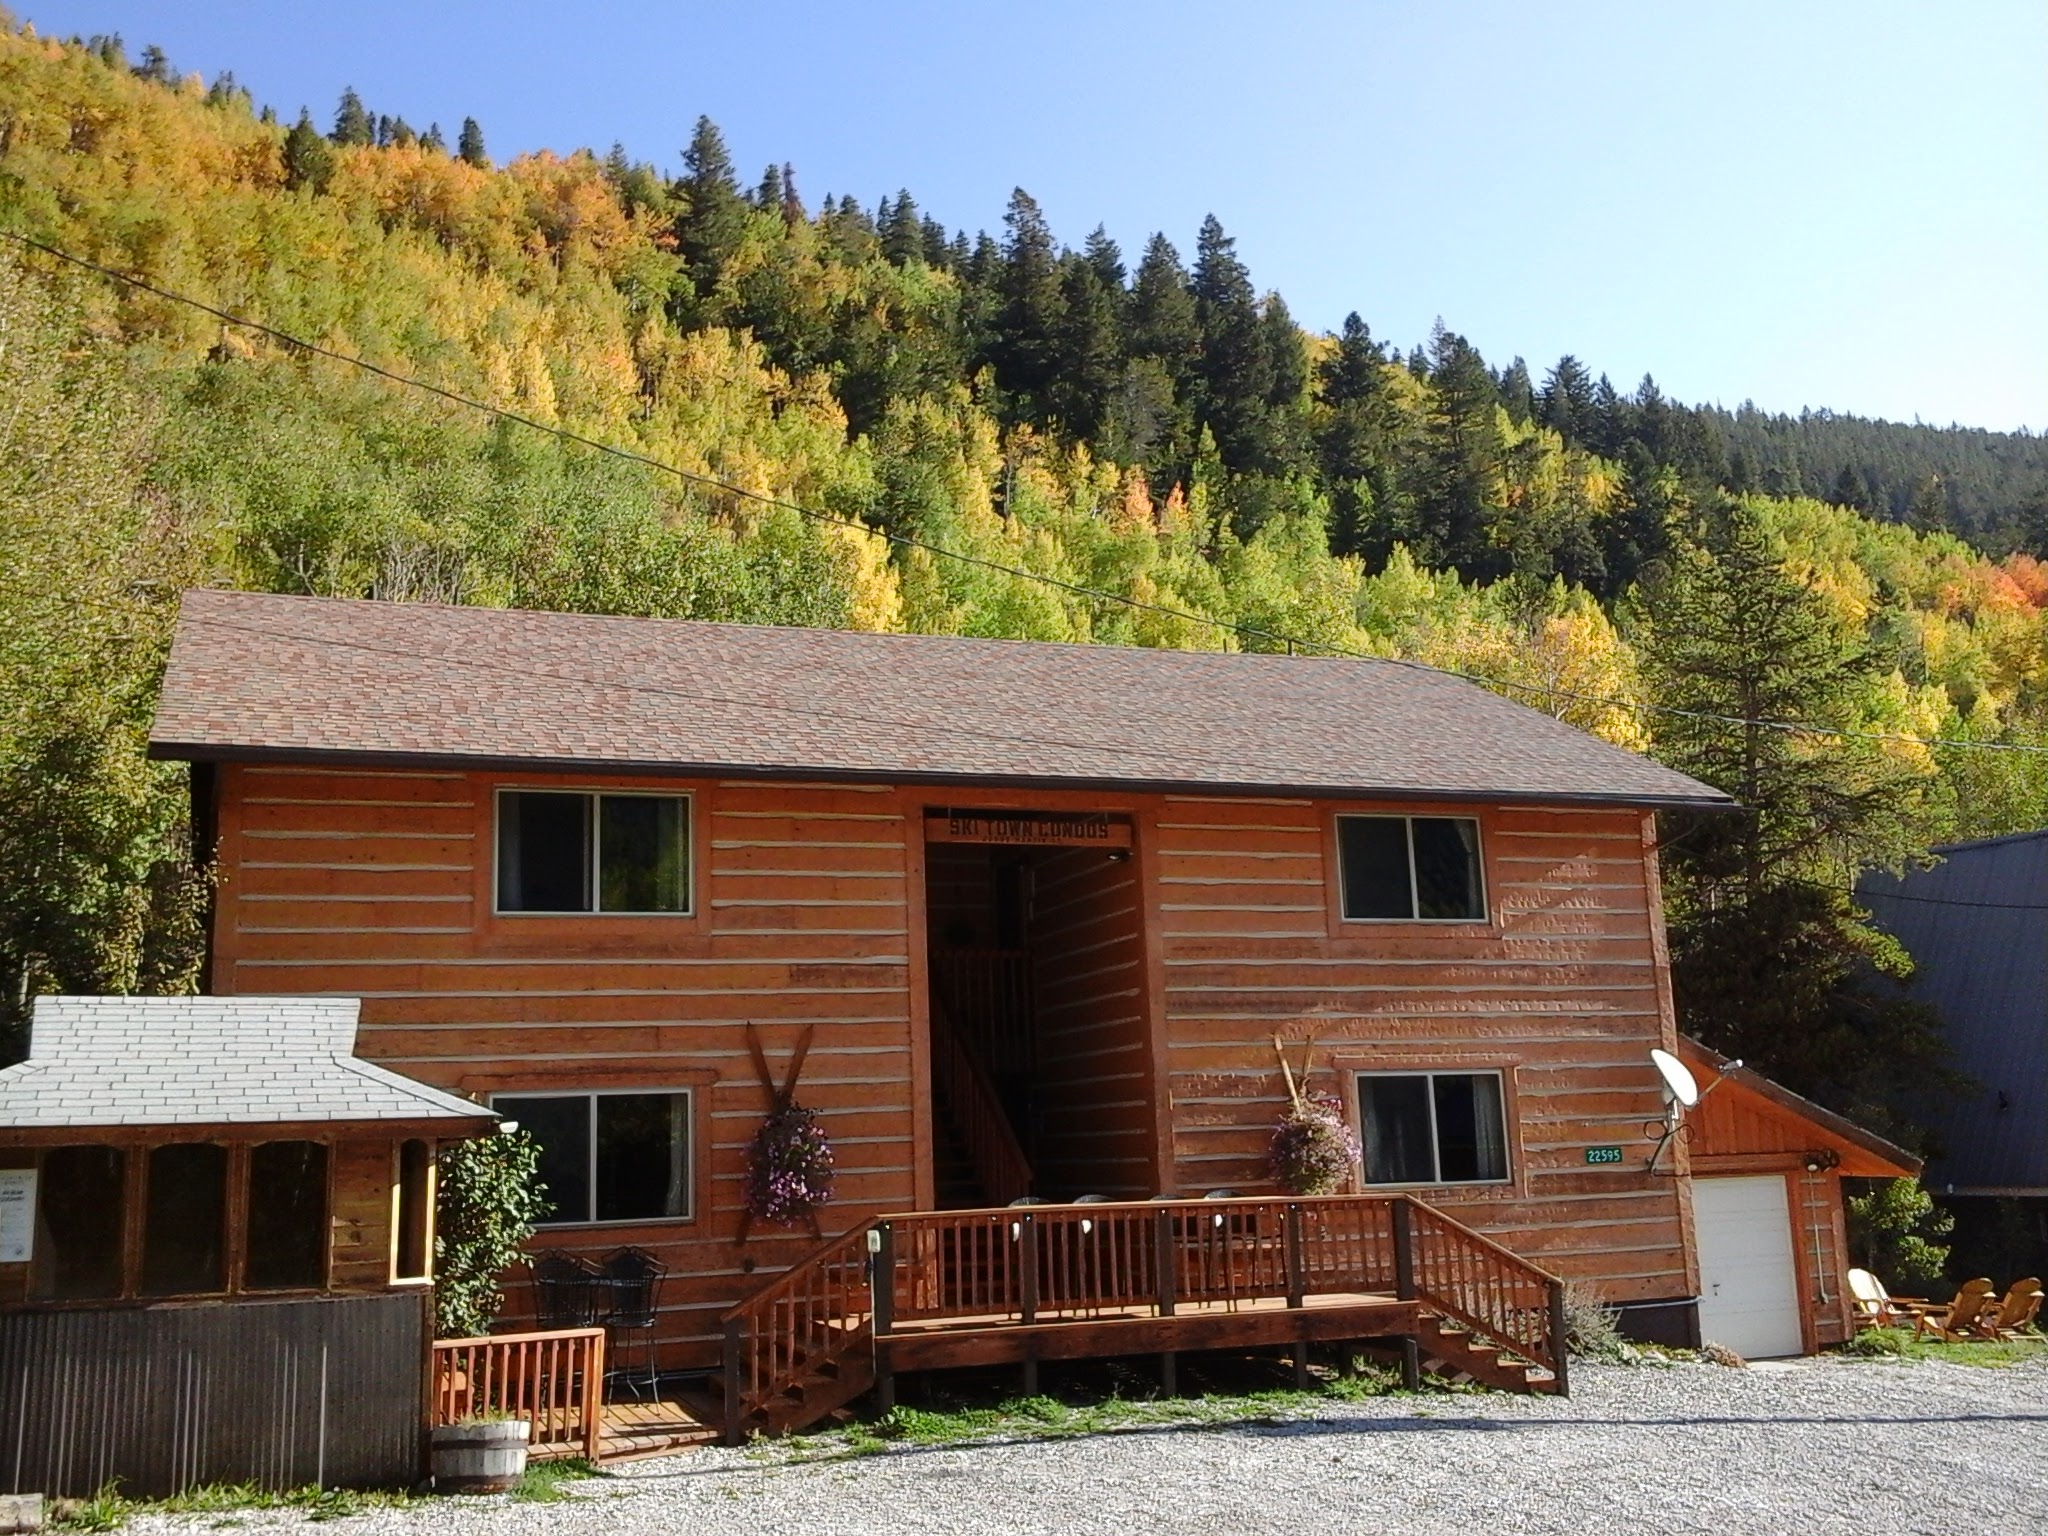 Exterior photos of condos with fall colors on the aspen trees just starting to peak.